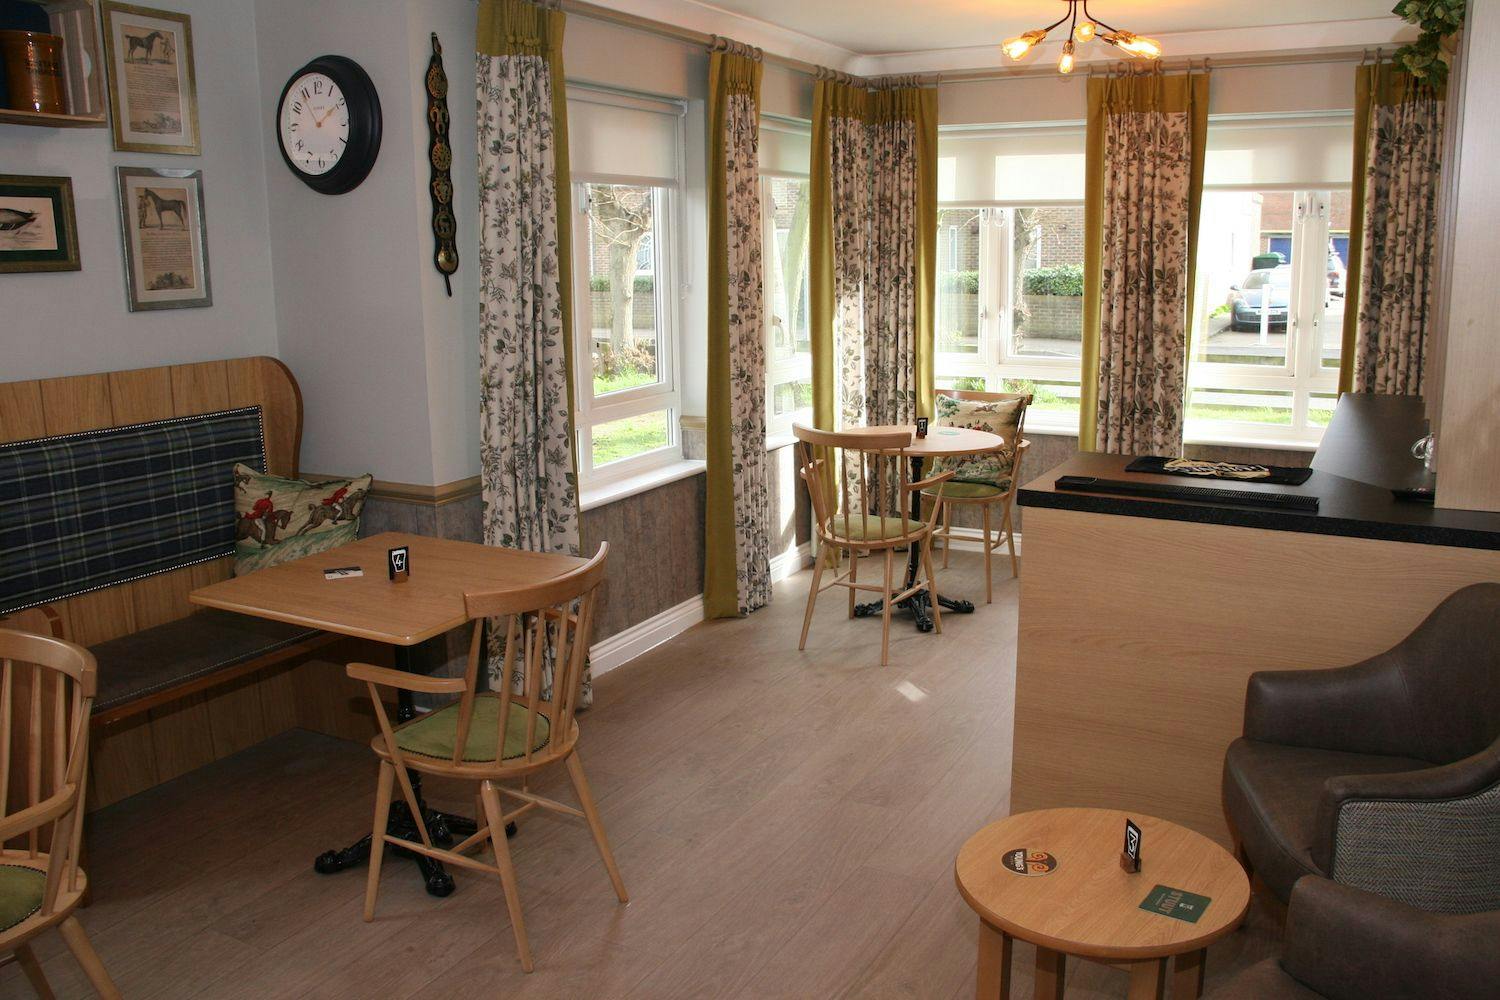 Link House care home